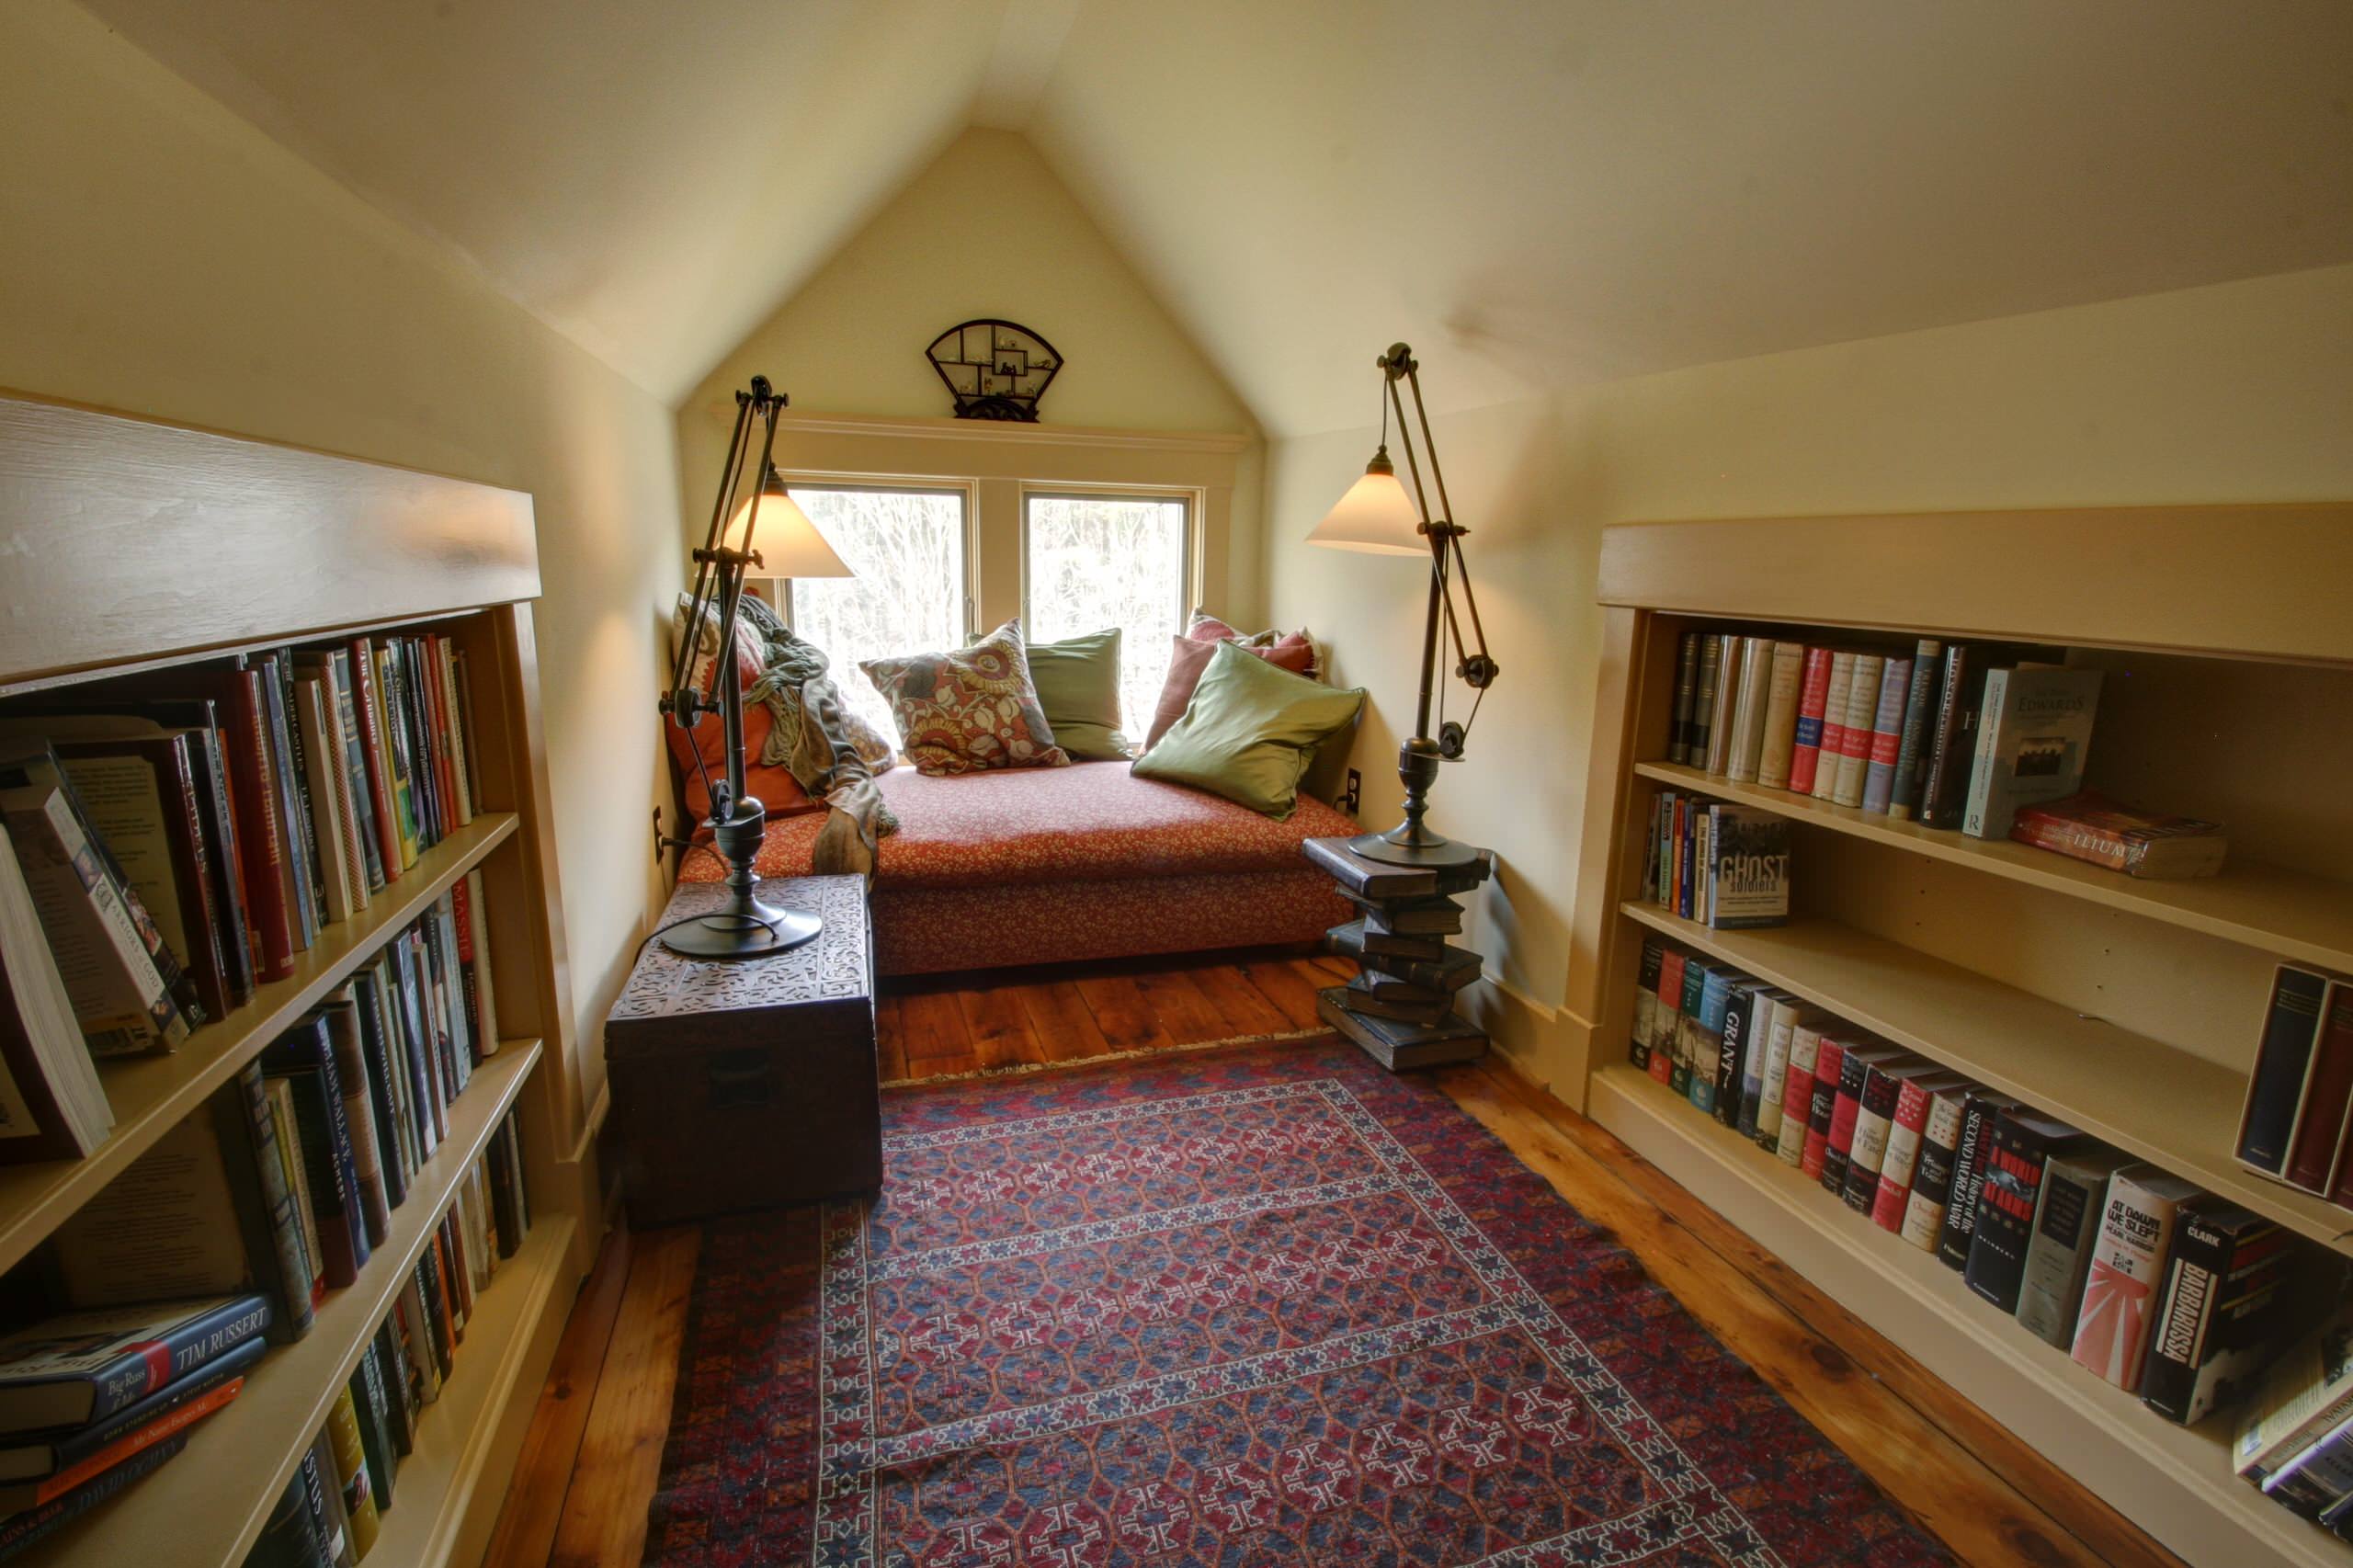 bookshelf and a attic with boxes